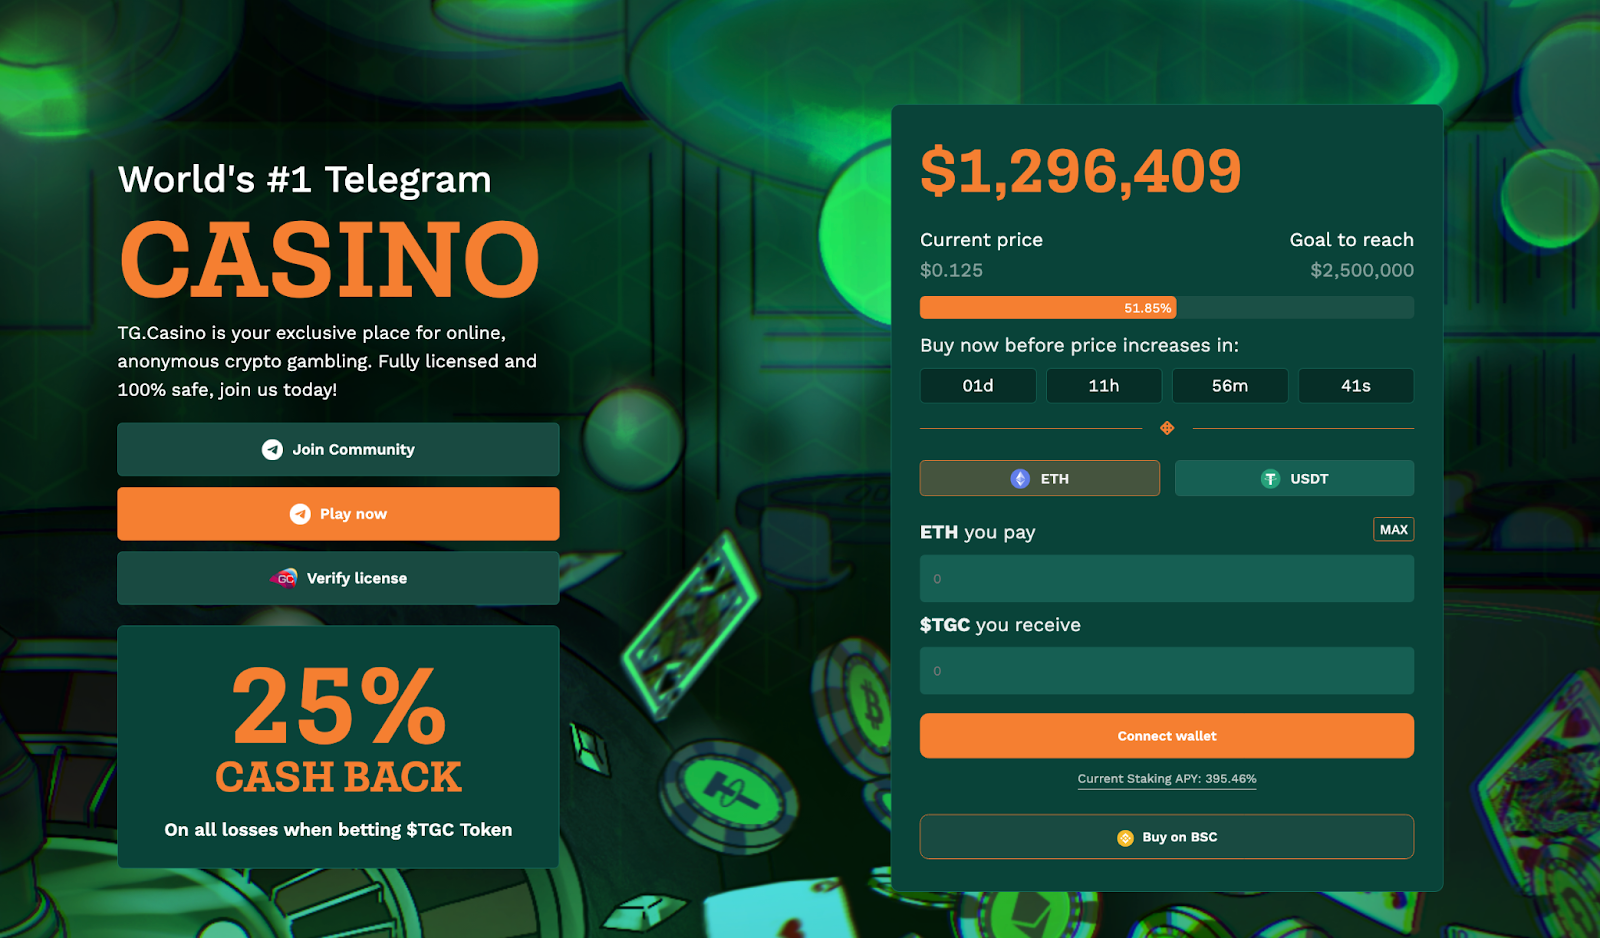 TG.Casino Tops $1.3 Million Milestone as Rollbit Surges - Just One Day to Go at Current Prices.